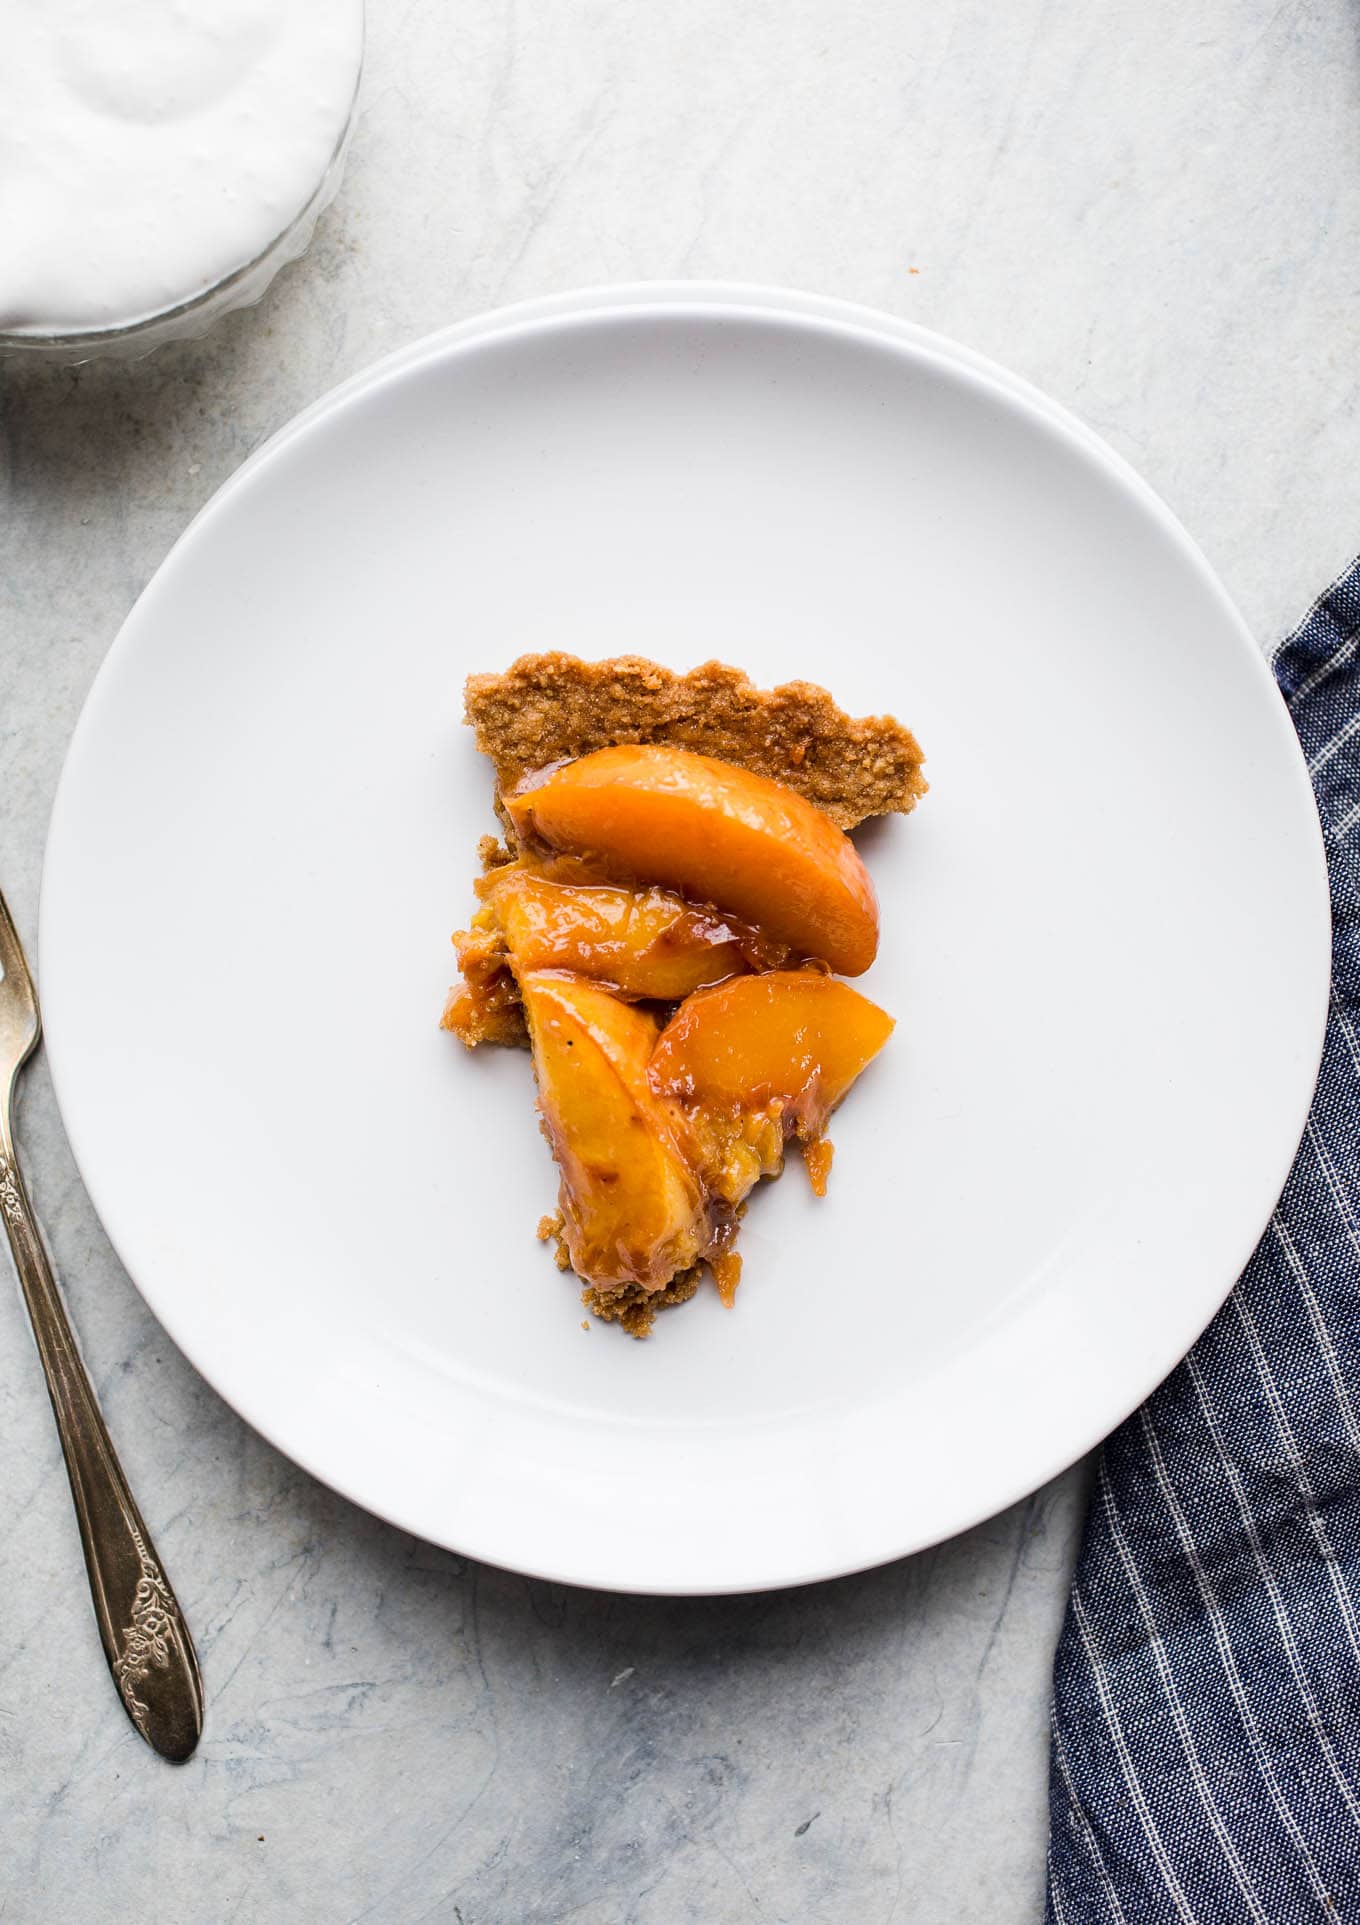 Roasted Peach Tart made with a gluten-free graham cracker crust, peaches roasted with coconut sugar, and served with a ginger-flavored coconut whipped cream. Simple and delicious! Gluten-free, vegan, refined sugar-free. 